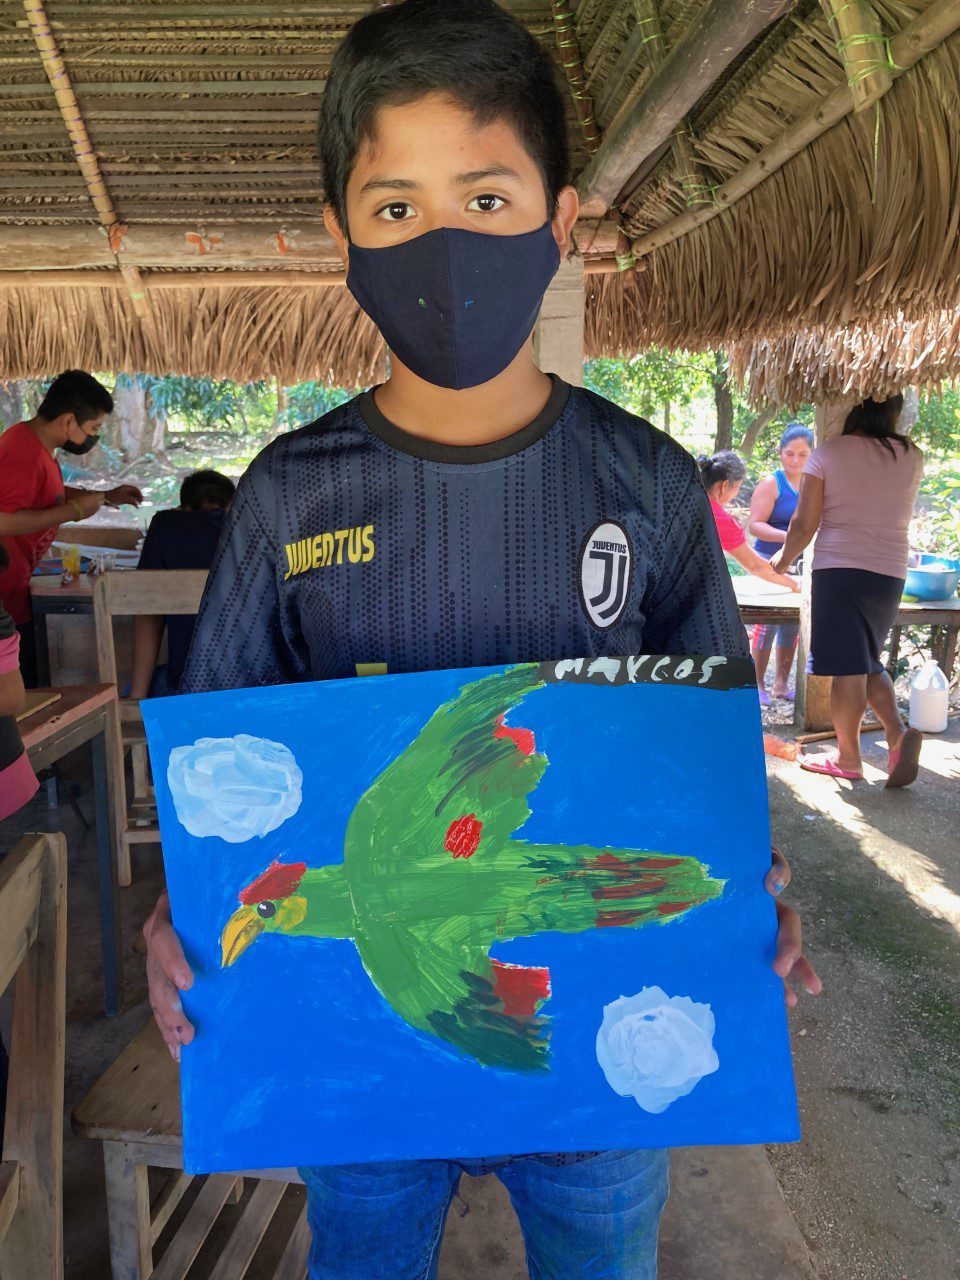 A boy in a facemask holds a painting of a parrot